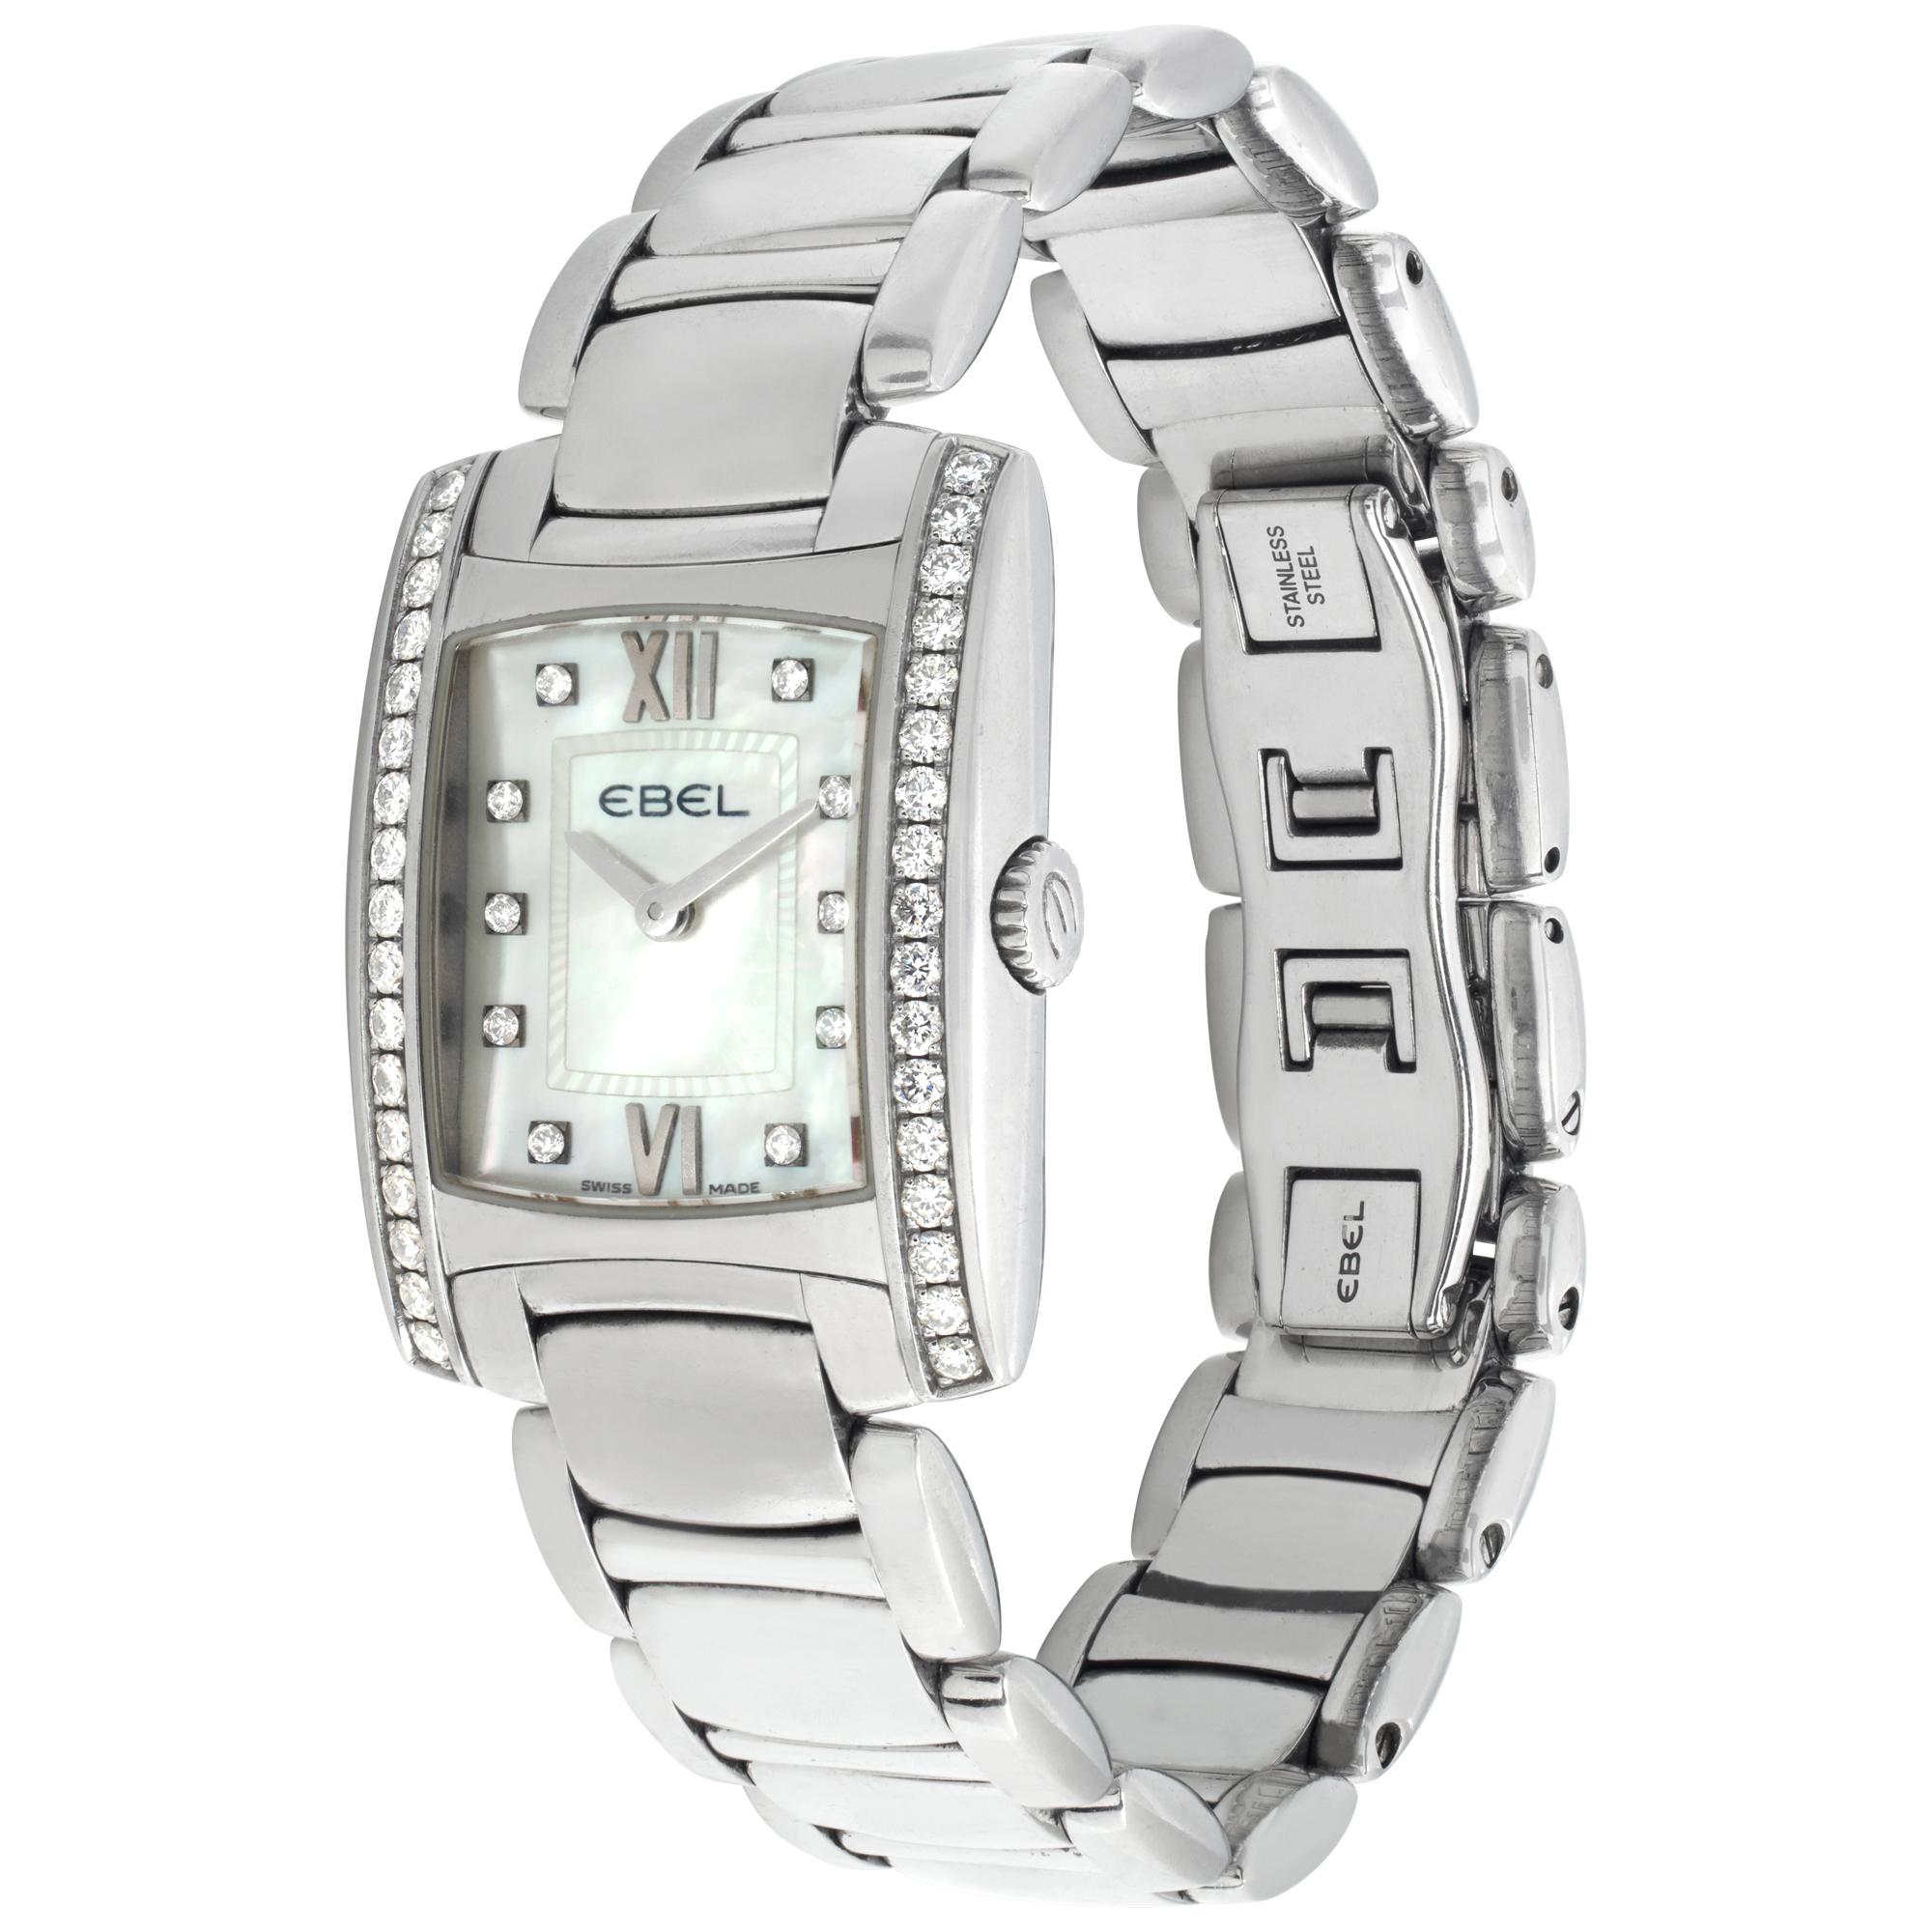 Ebel Brasilia watch with mother of pearl diamond dial and diamond bezel in stainless steel. Quartz. 30 mm length (lud to lug) by 23.5 mm width case size. With box and papers. Ref E9976M2S. Circa 2006. Fine Pre-owned Ebel Watch. Certified preowned